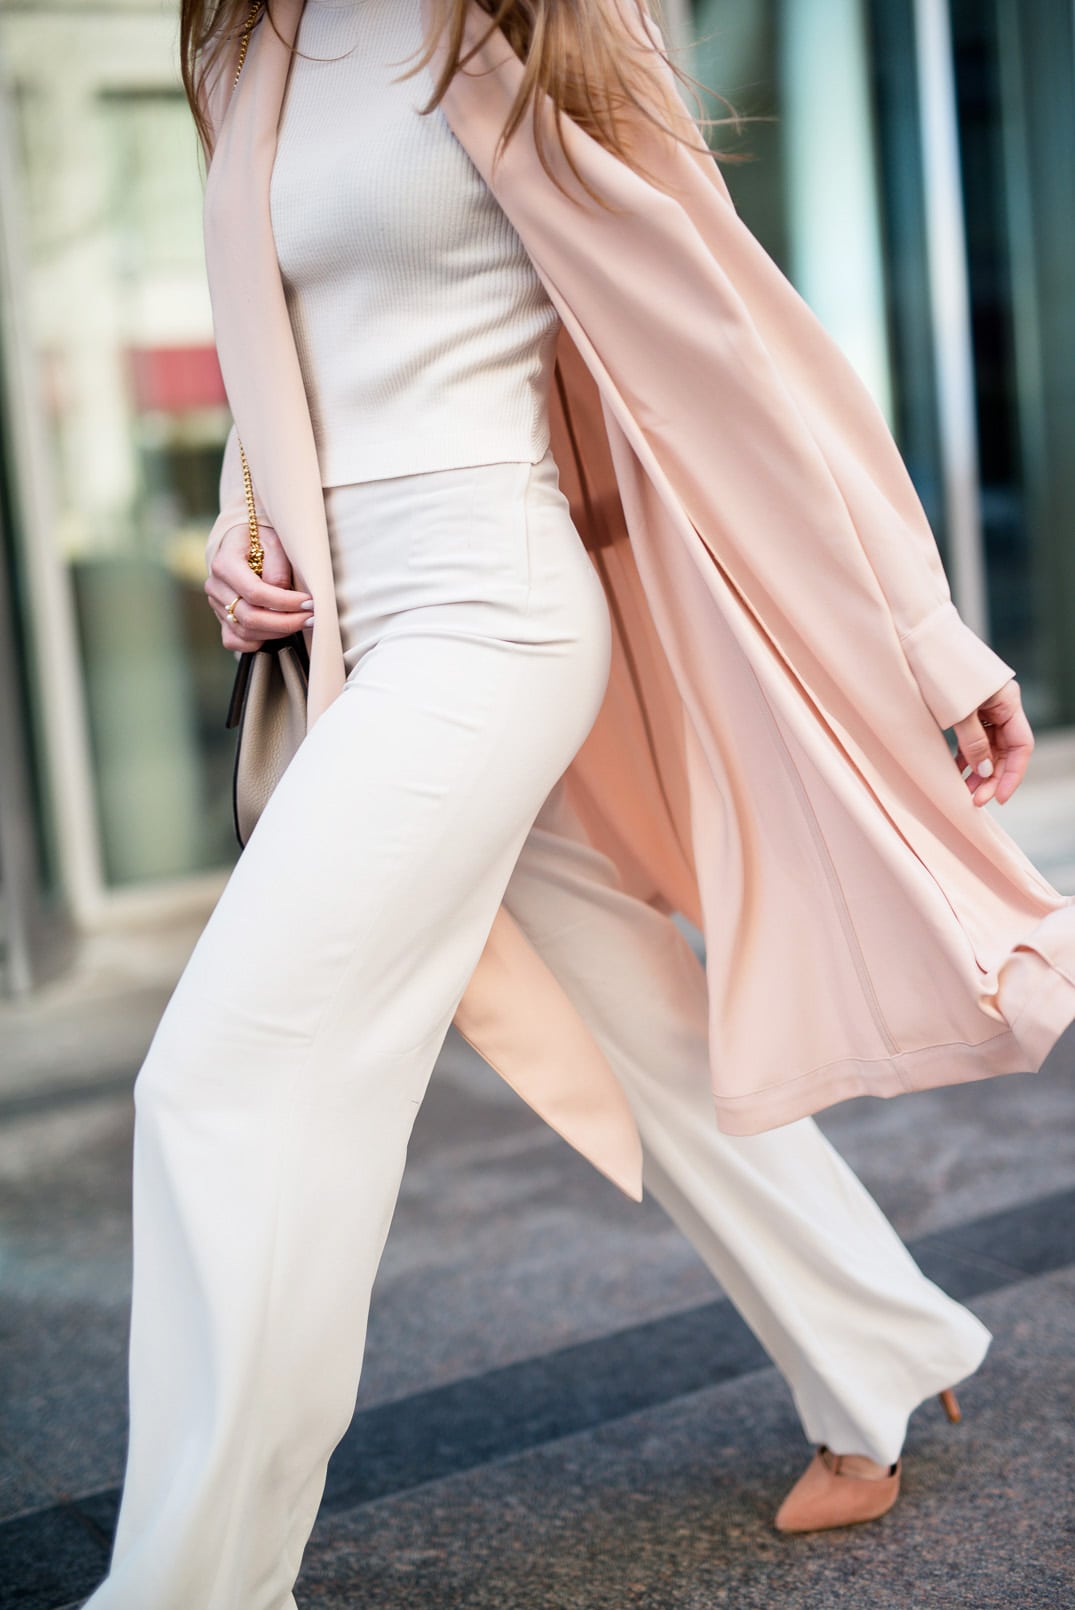 Pam Hetlinger wearing a Mango blush jacket, reiss lace up pumps, h&m high waisted white pants, h&m white crop top sweater, dior sunglasses, and chloe drew bag.